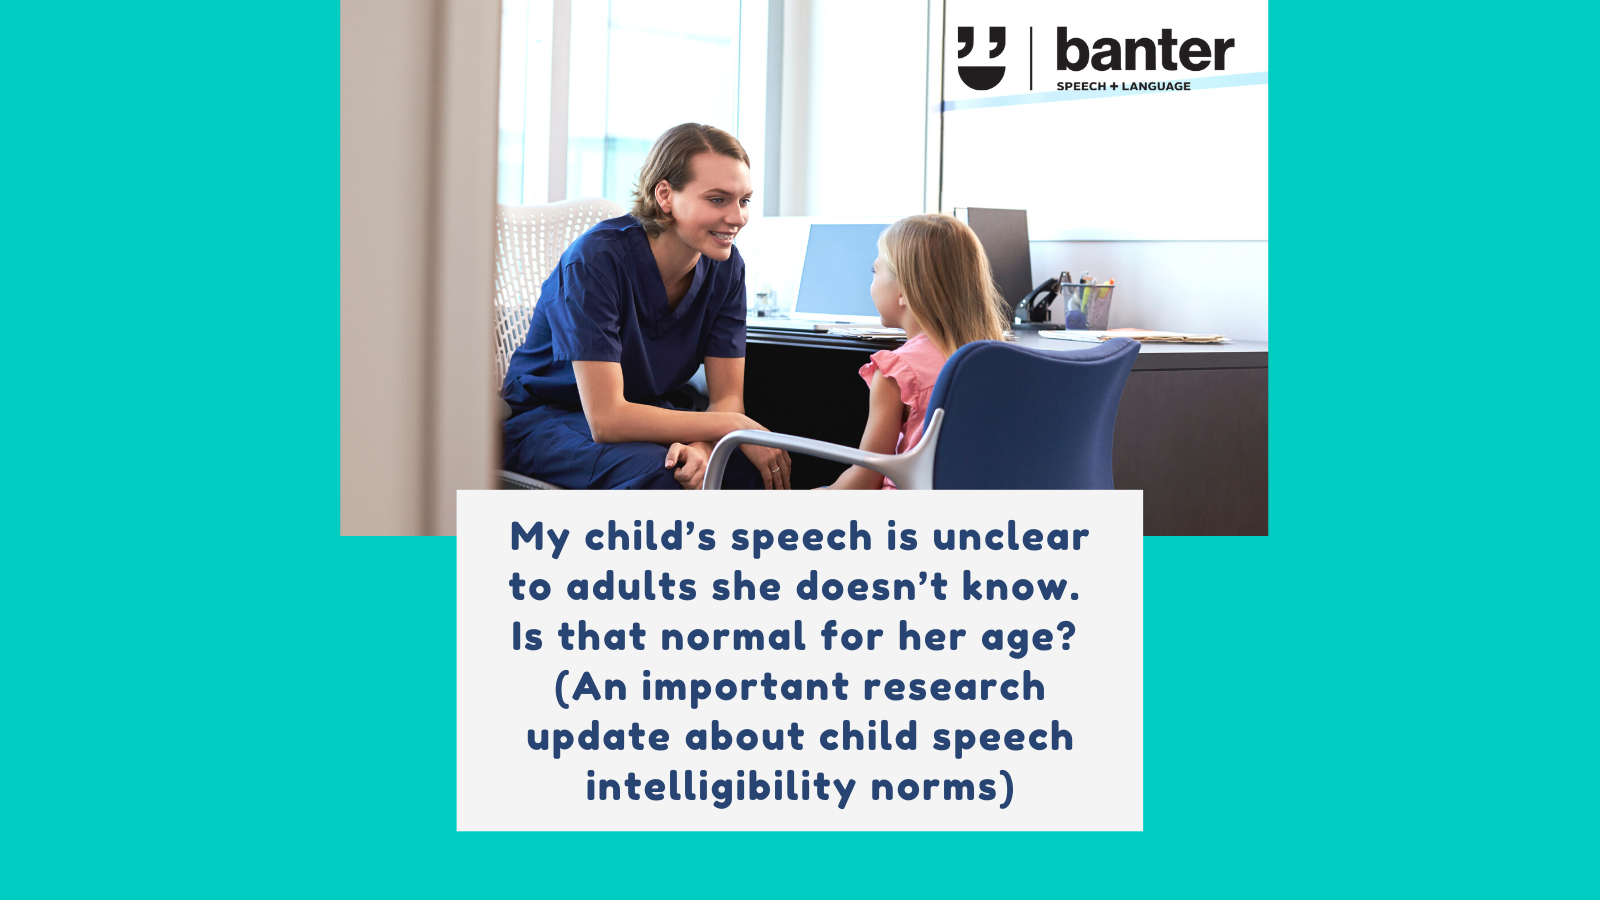 My child’s speech is unclear to adults she doesn’t know. Is that normal for her age (An important research update about child speech intelligibility norms)